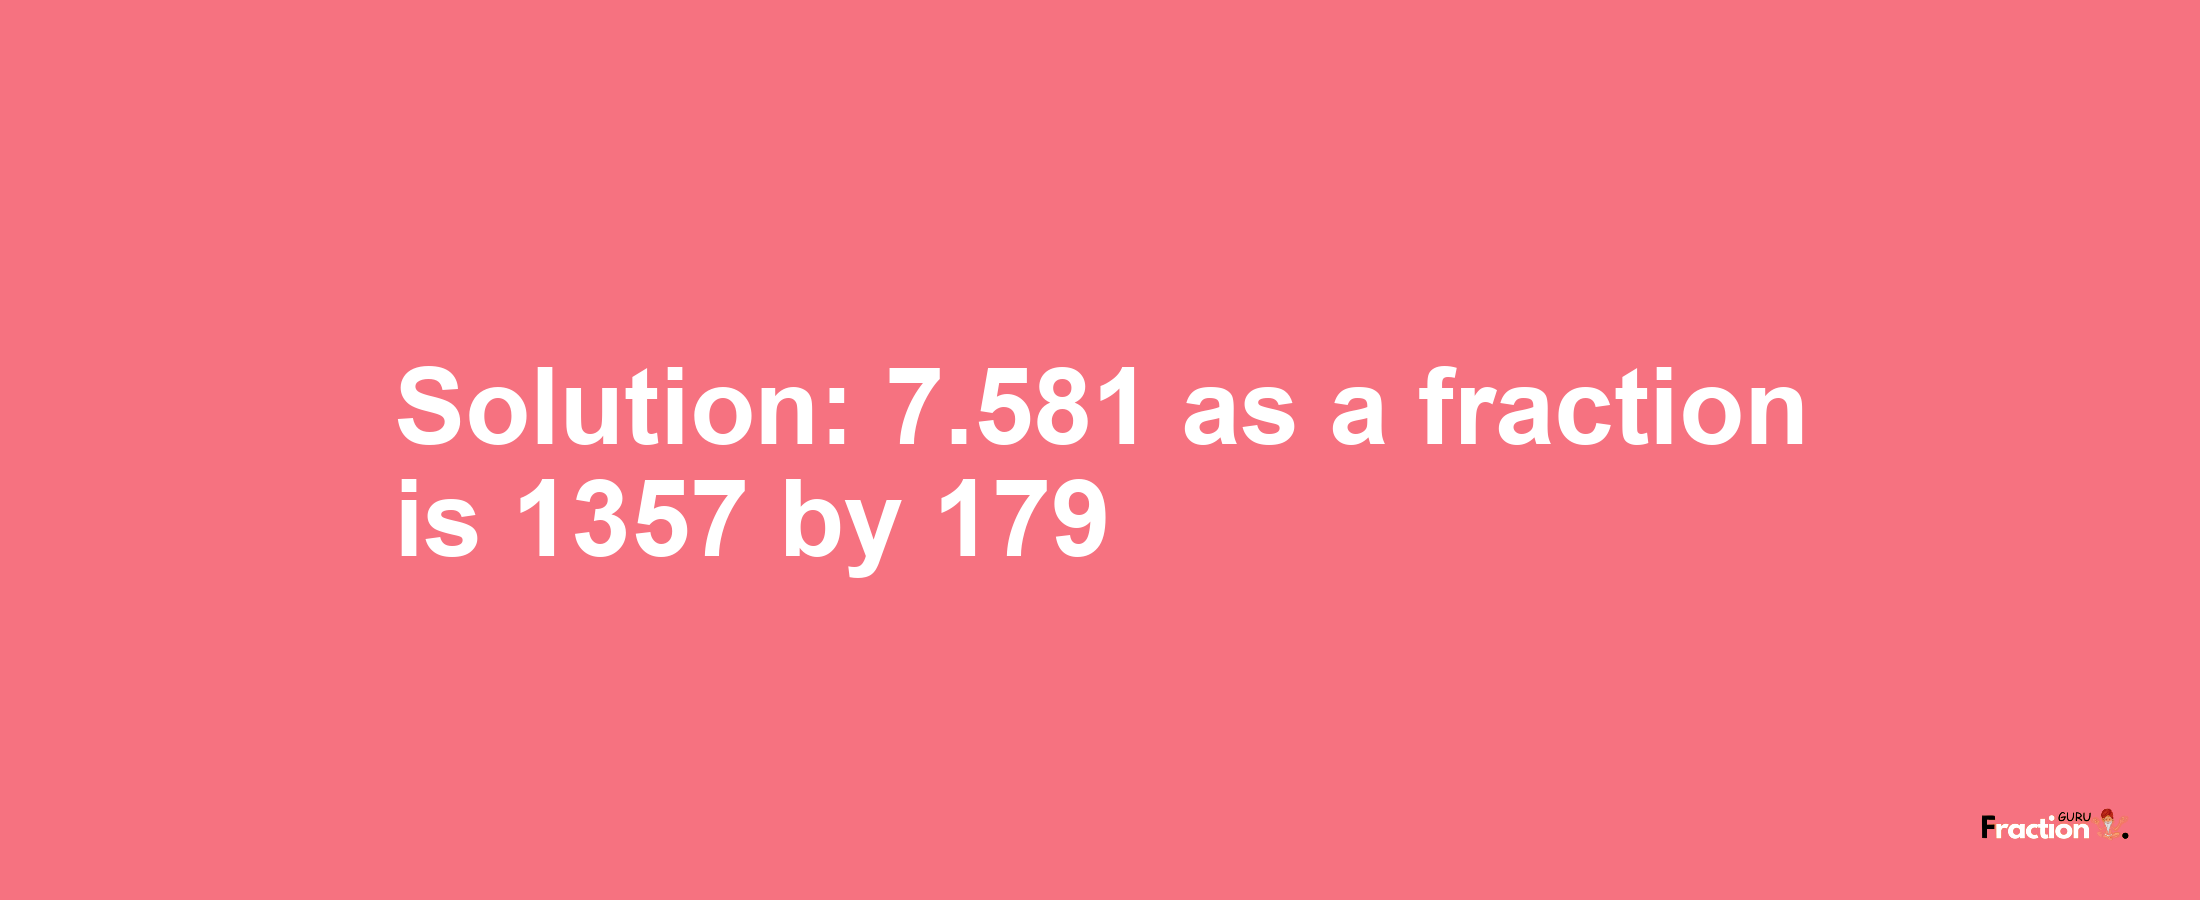 Solution:7.581 as a fraction is 1357/179